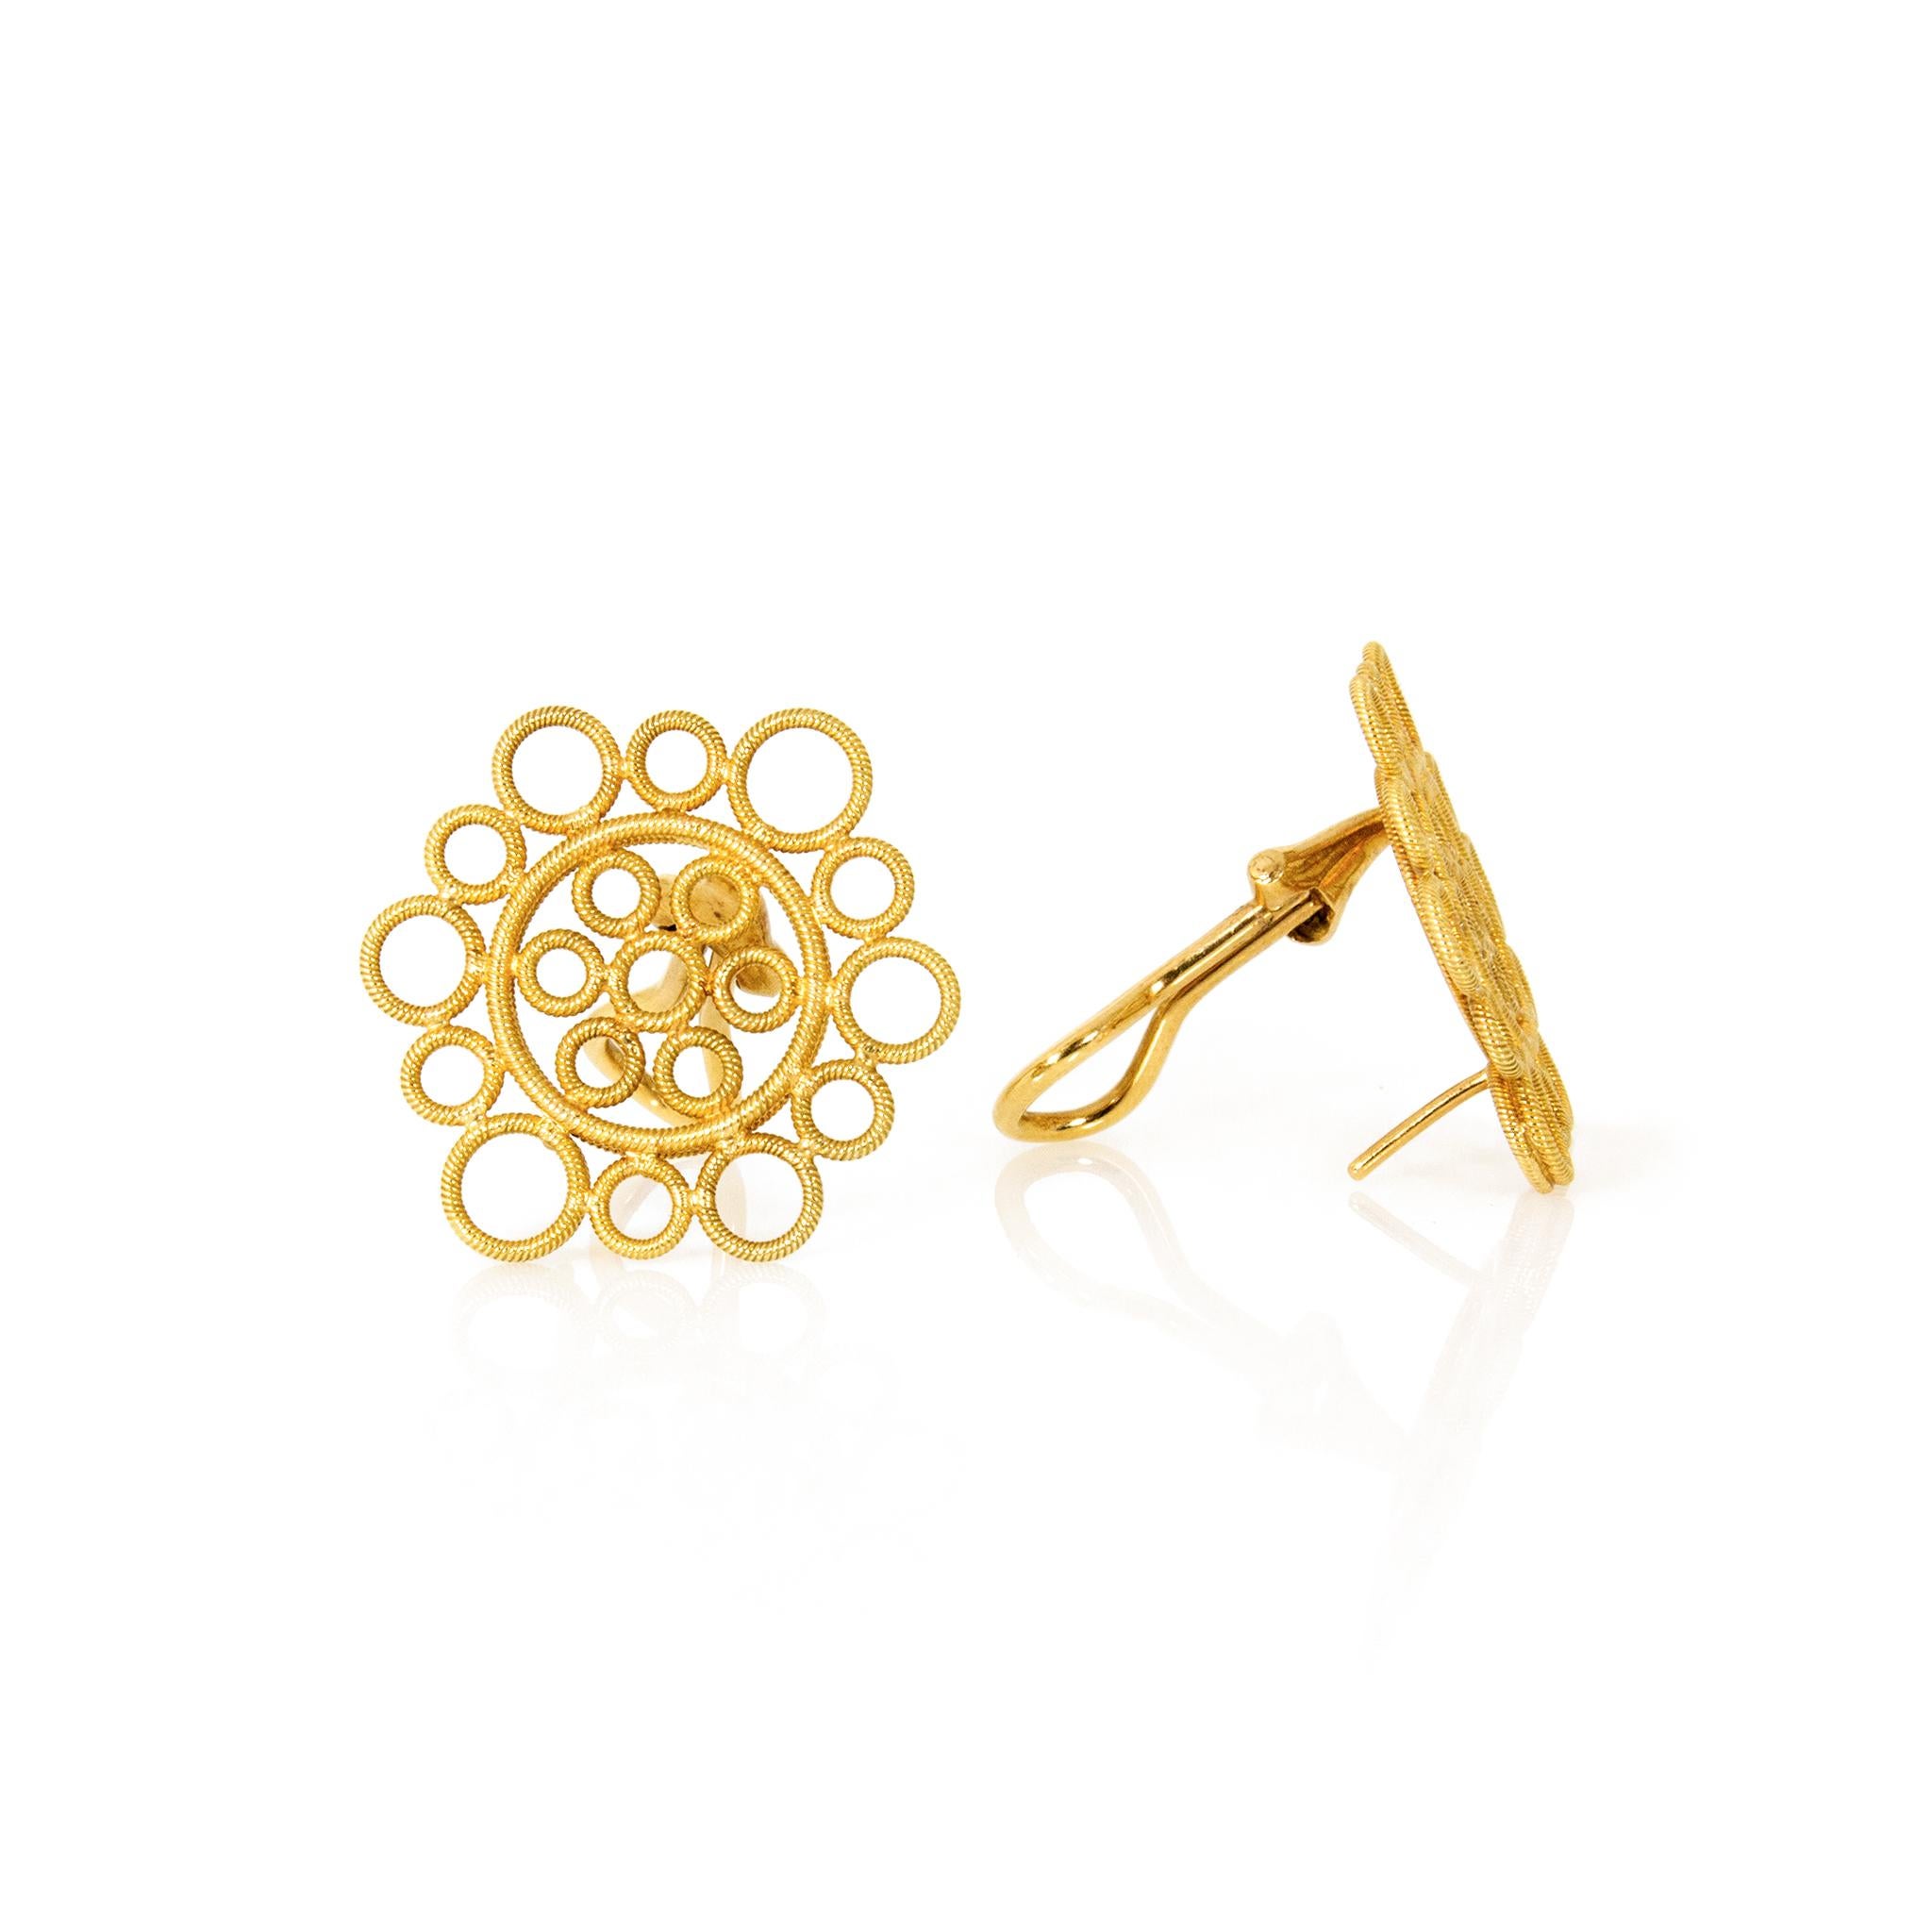 *** Clip-on with posts ***
18k Yellow Gold
Total Weight: 9.6 grams